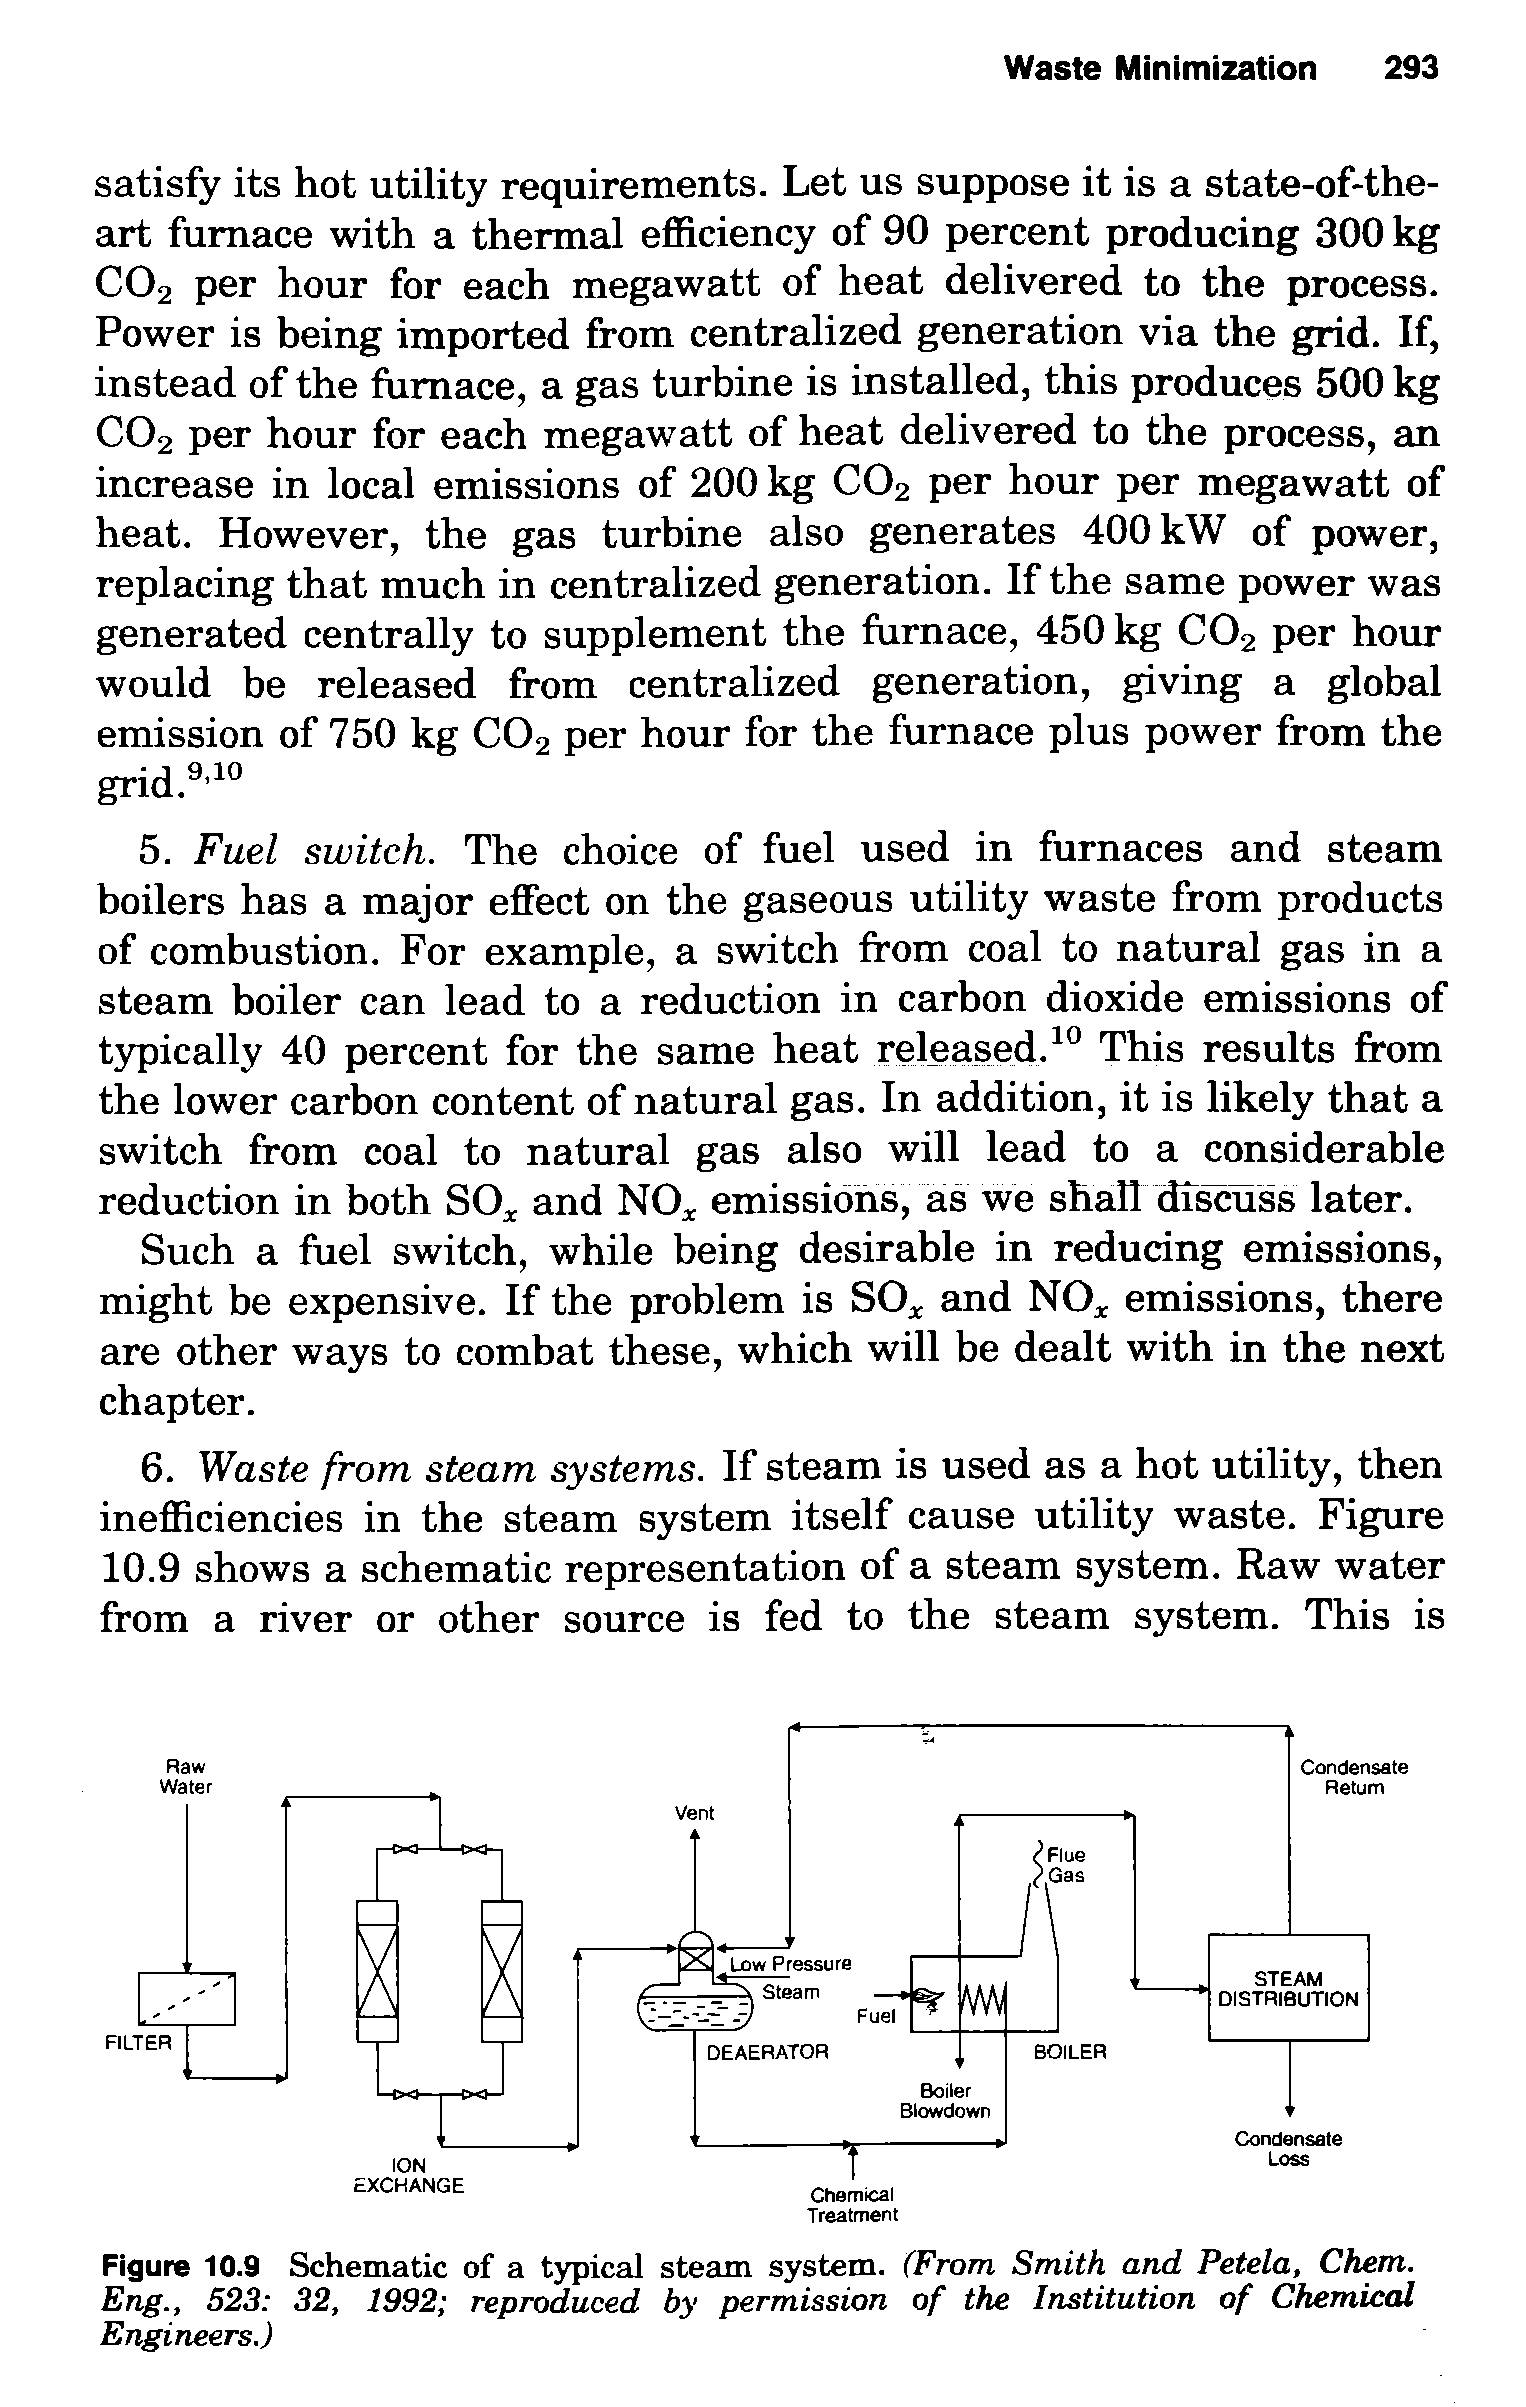 Figure 10.9 Schematic of a typical steam system. (From Smith and Petela, Chem. Eng., 523 32, 1992 reproduced by permission of the Institution of Chemical Engineers.)...